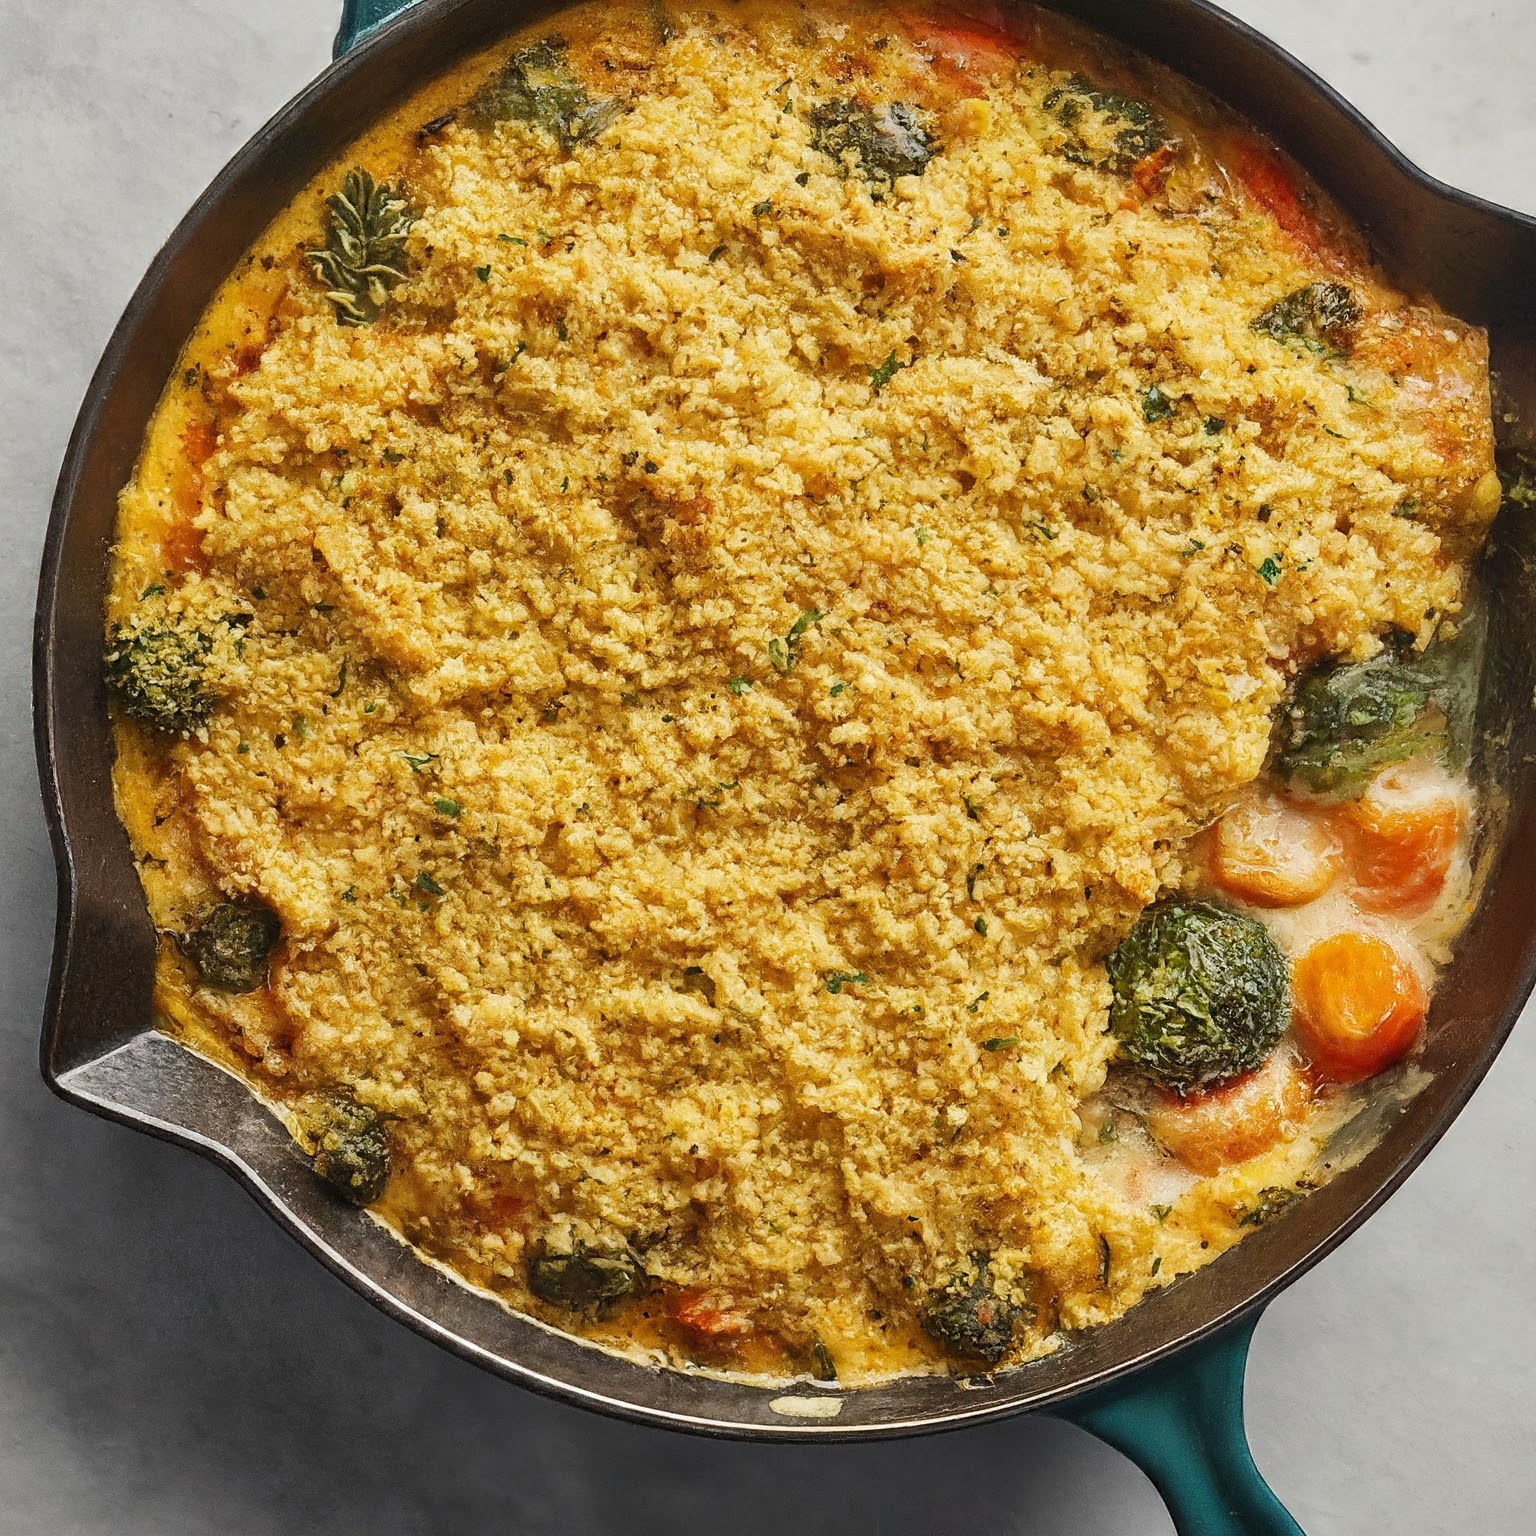 Baked Millet and Vegetable Casserole with a golden brown crust, layers of vegetables, and a creamy cheese sauce.